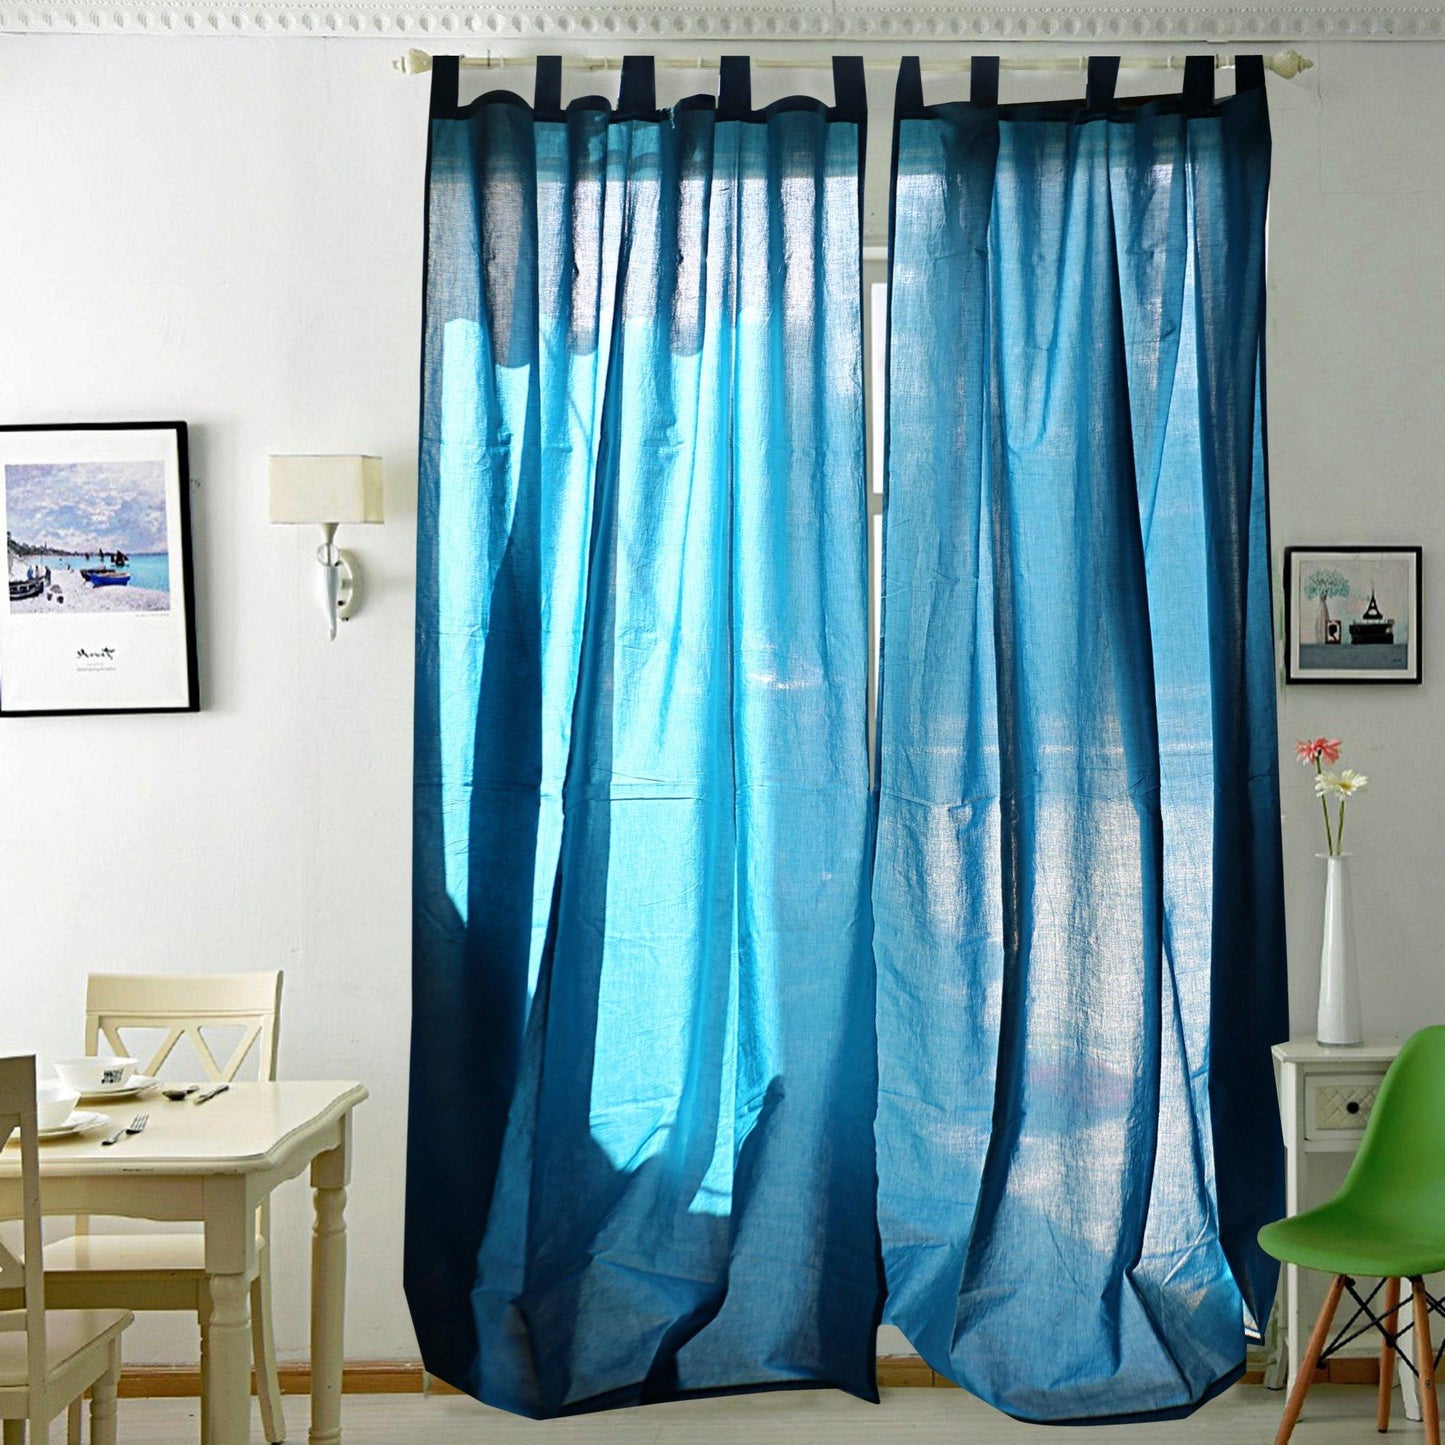 Solid blue Voile Curtain Pair - The Teal Thread